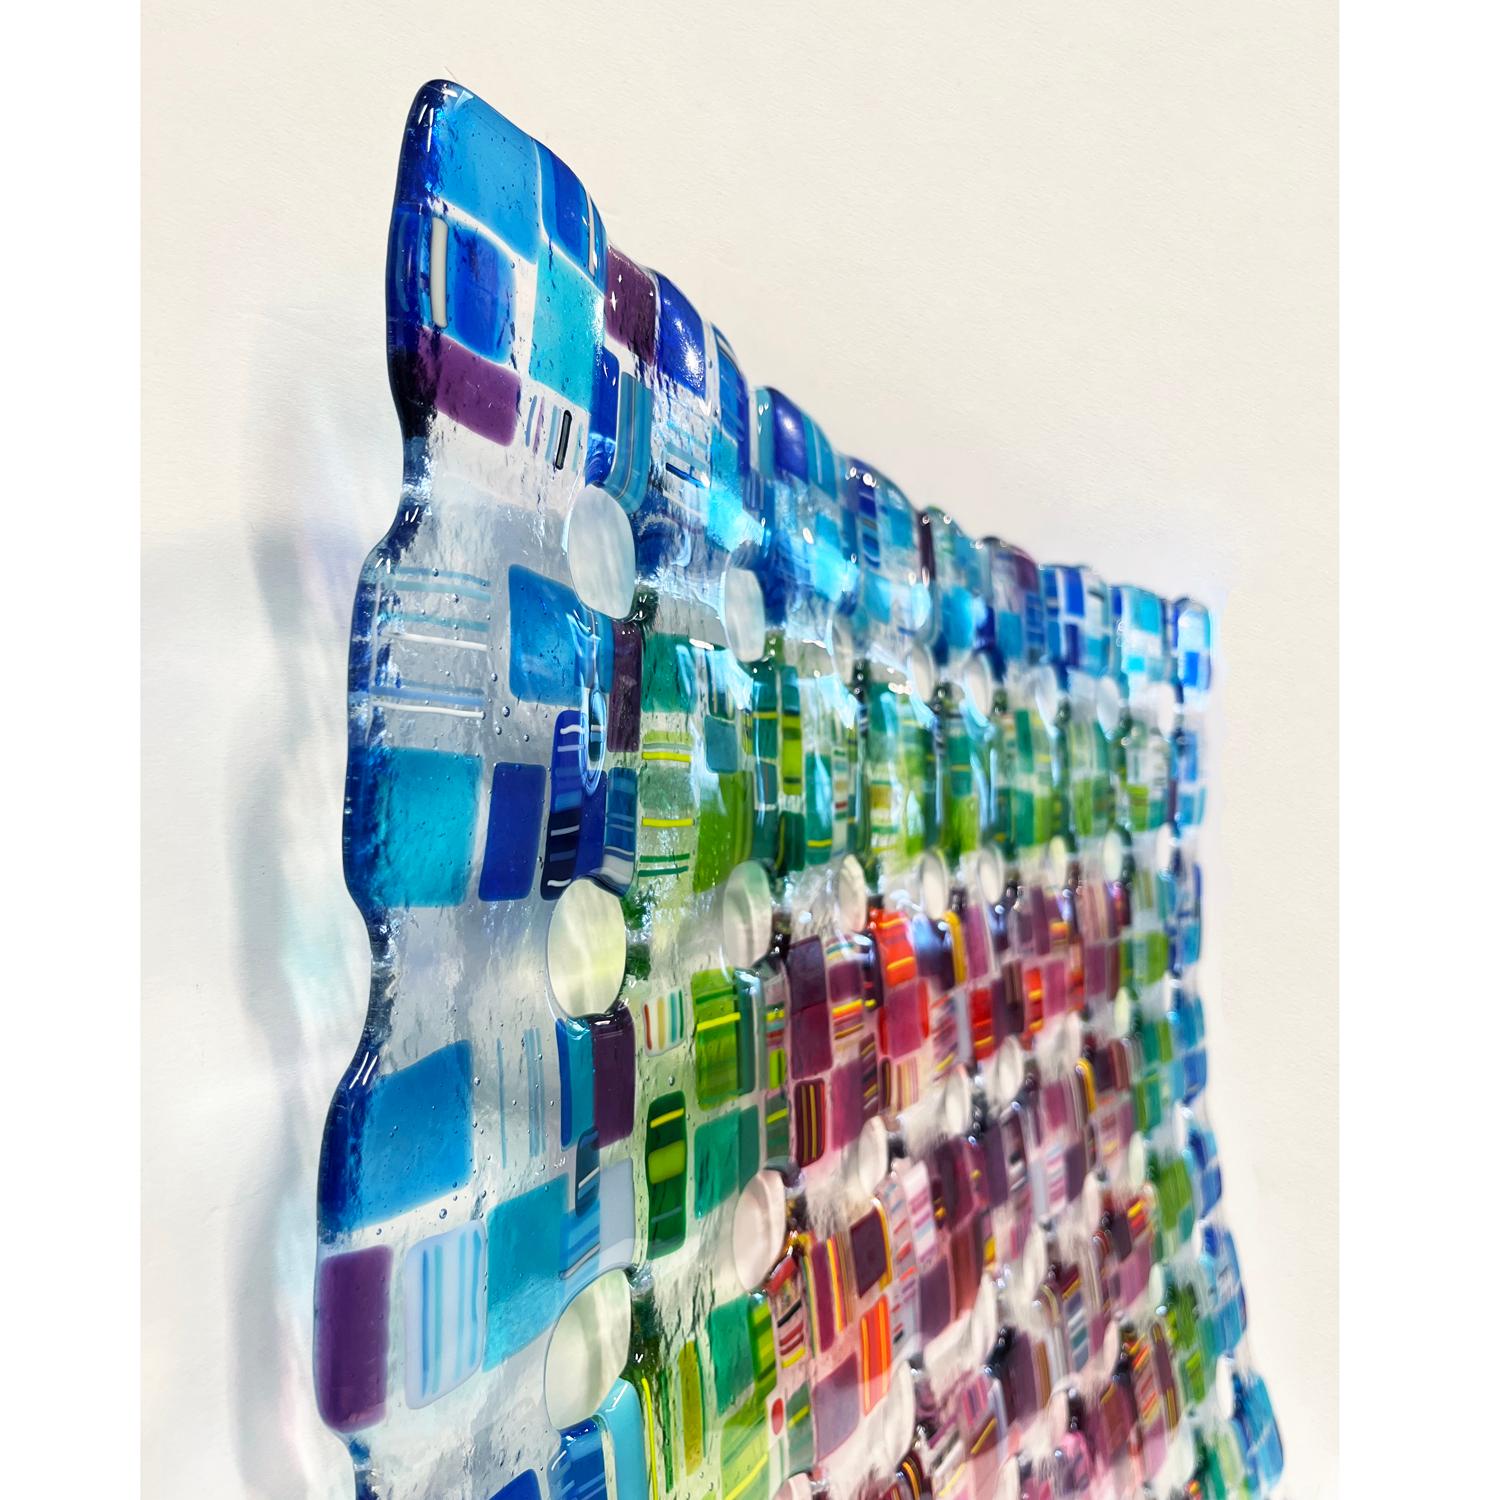 This stunning fused glass wall sculpture by Renato Foti is composed entirely of glass. The 3D sculpture can be hung as a square or a diamond from the provided hooks.

Renato Foti received his BFA from the University of Western Ontario in 1986,